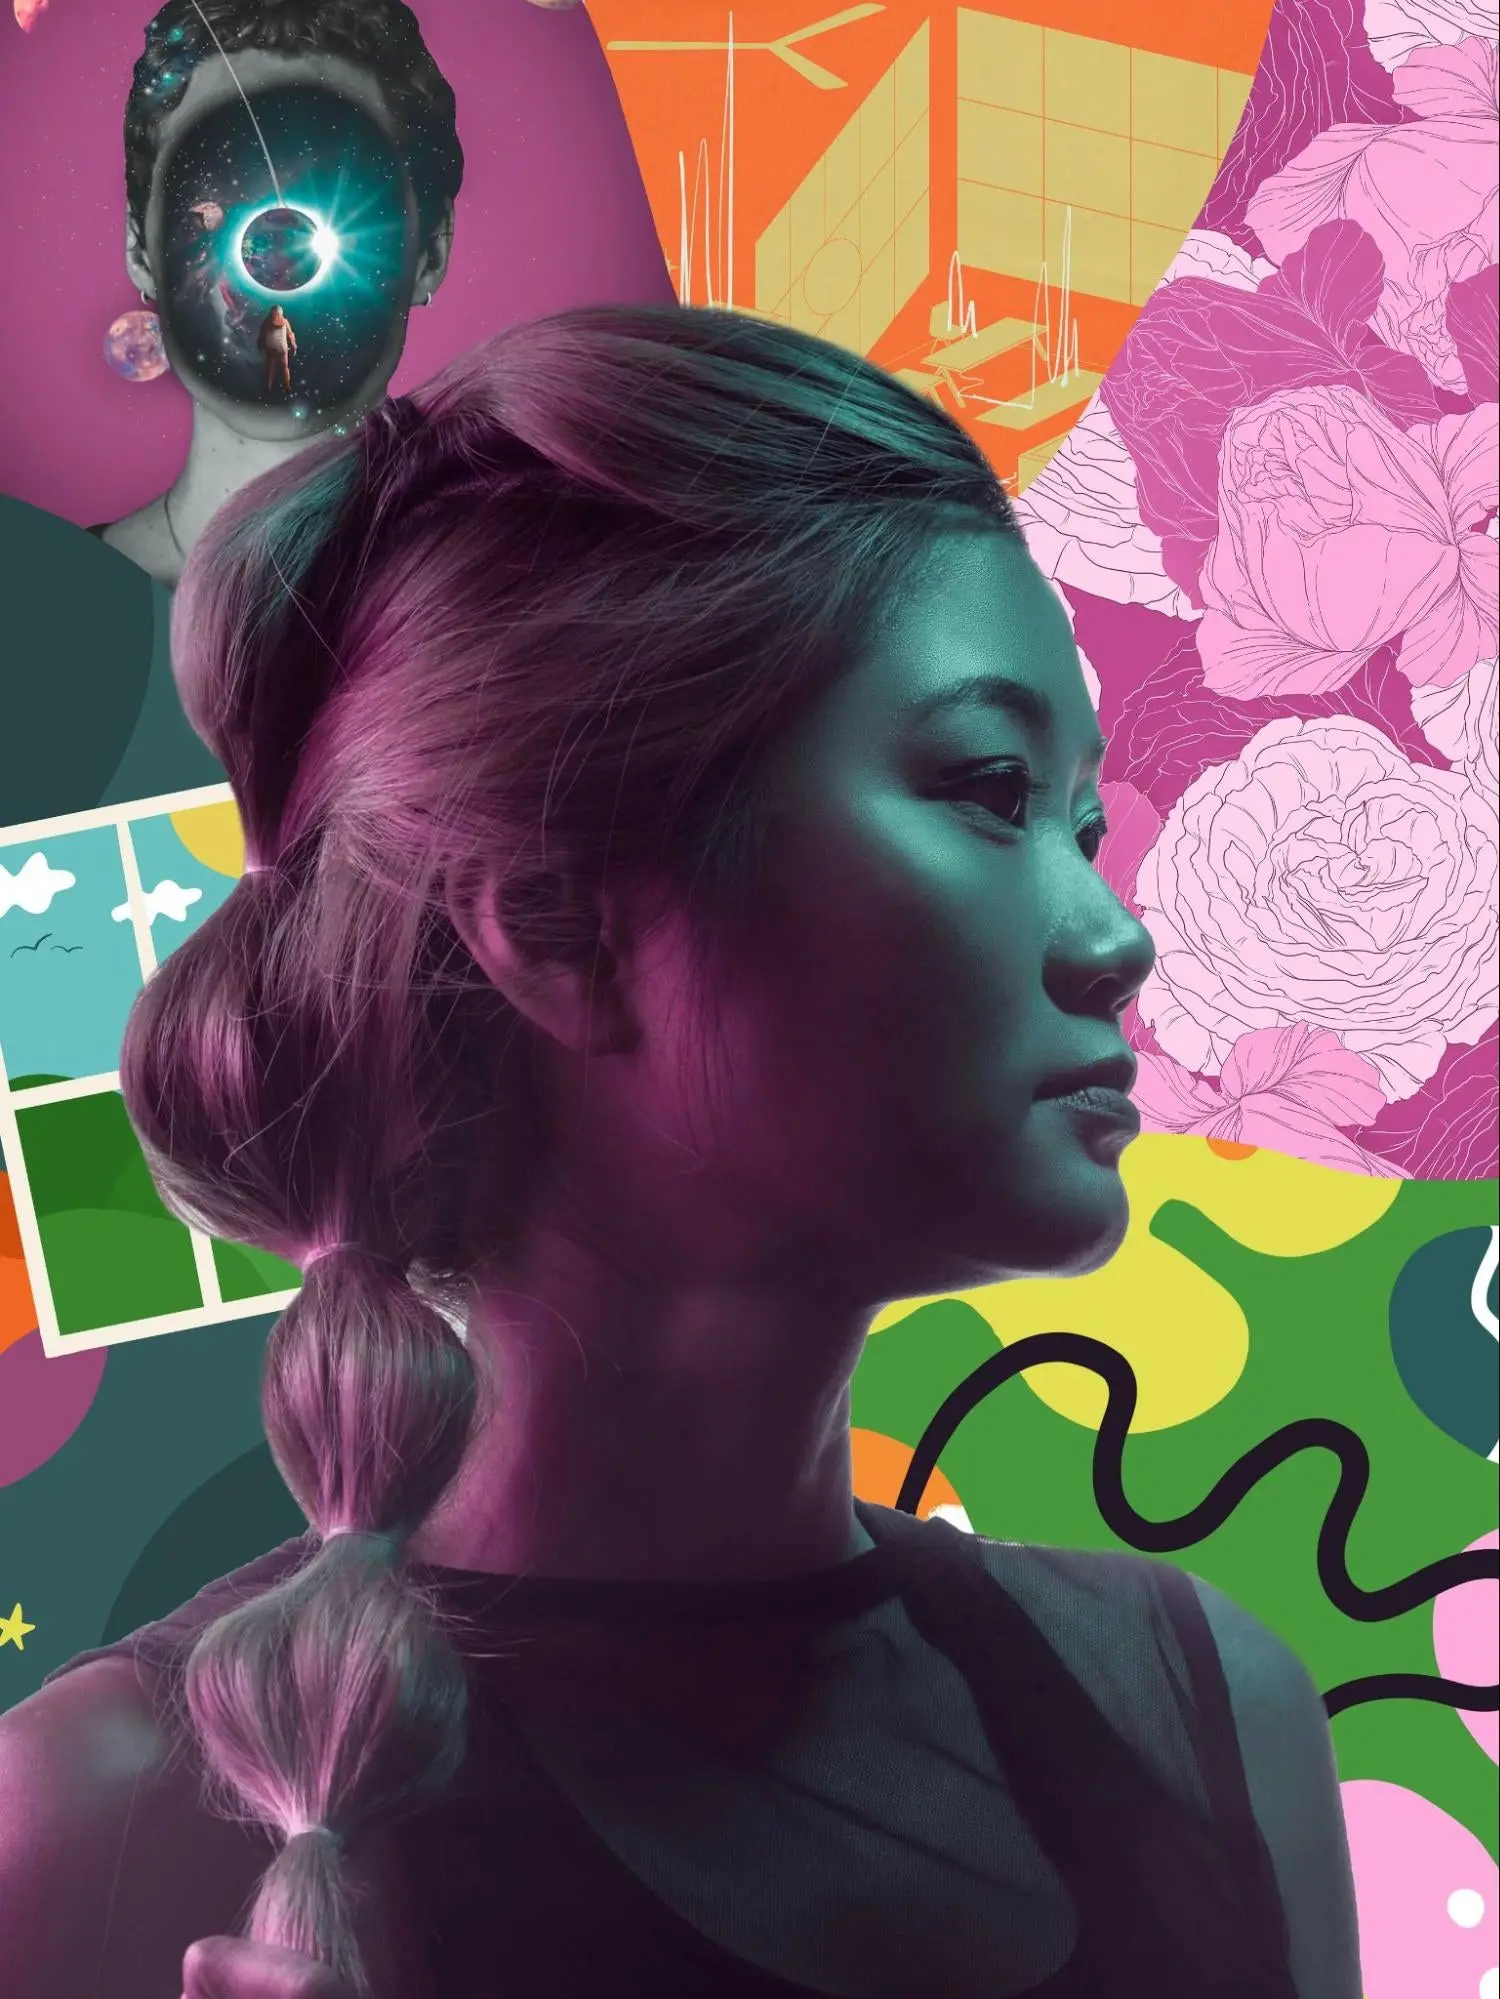 Poster of girl looking into the distance with abstract art around her. 